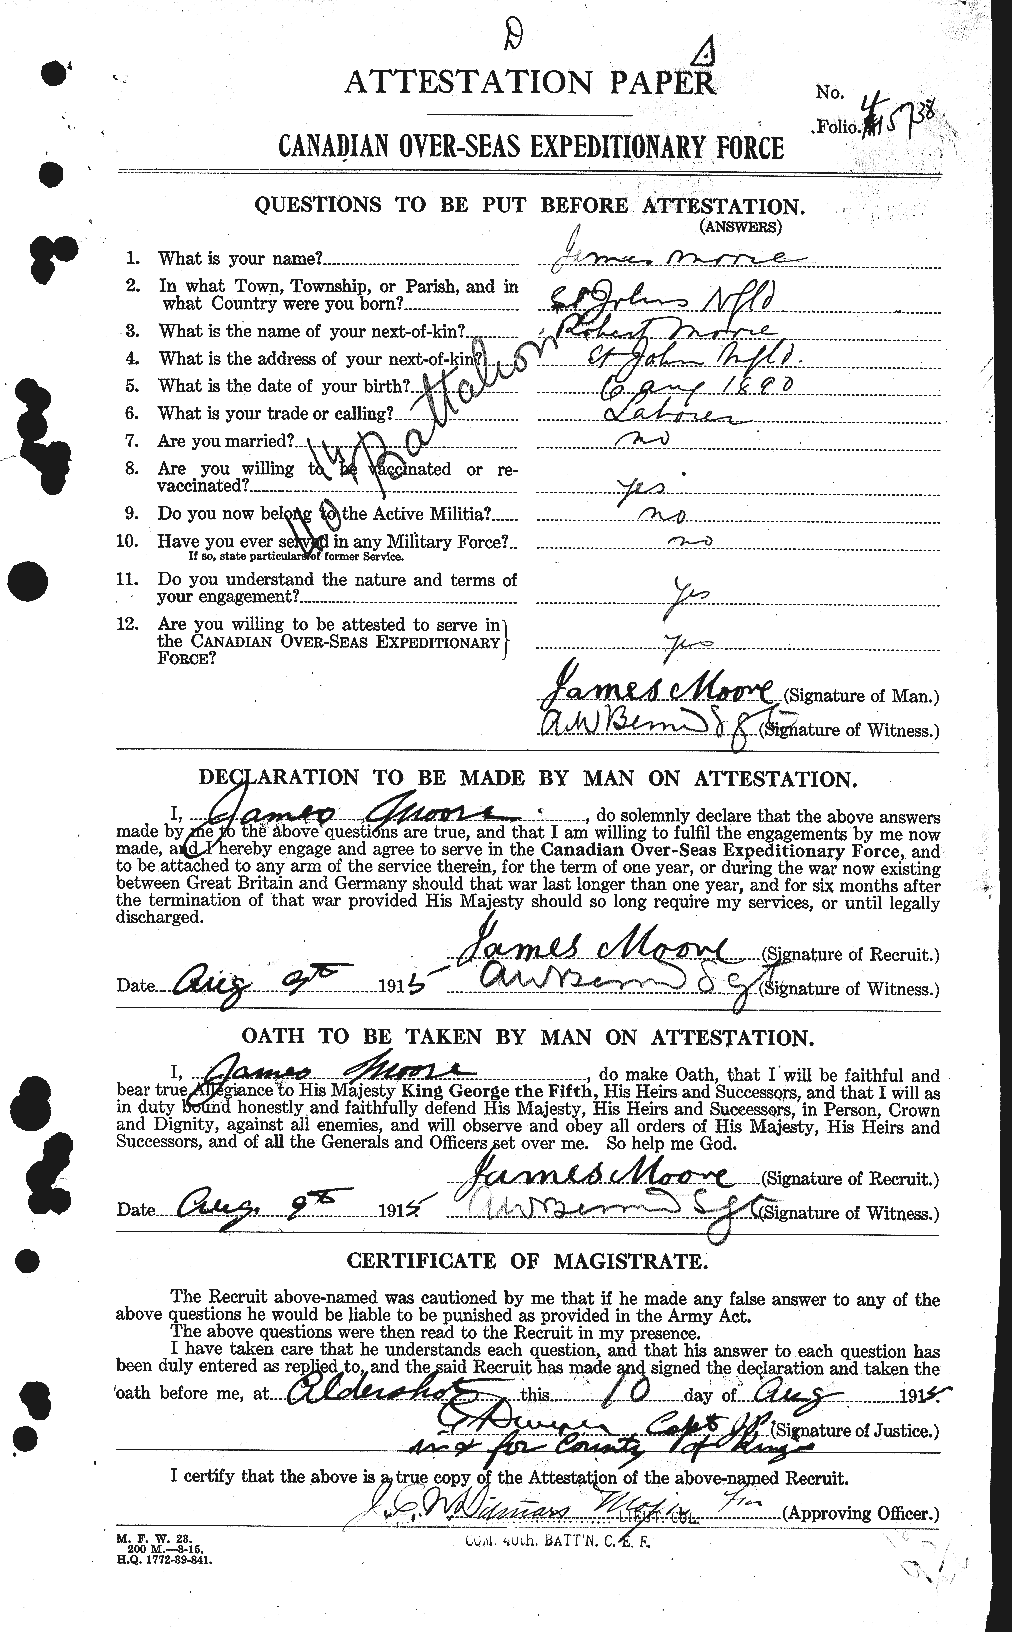 Personnel Records of the First World War - CEF 502195a